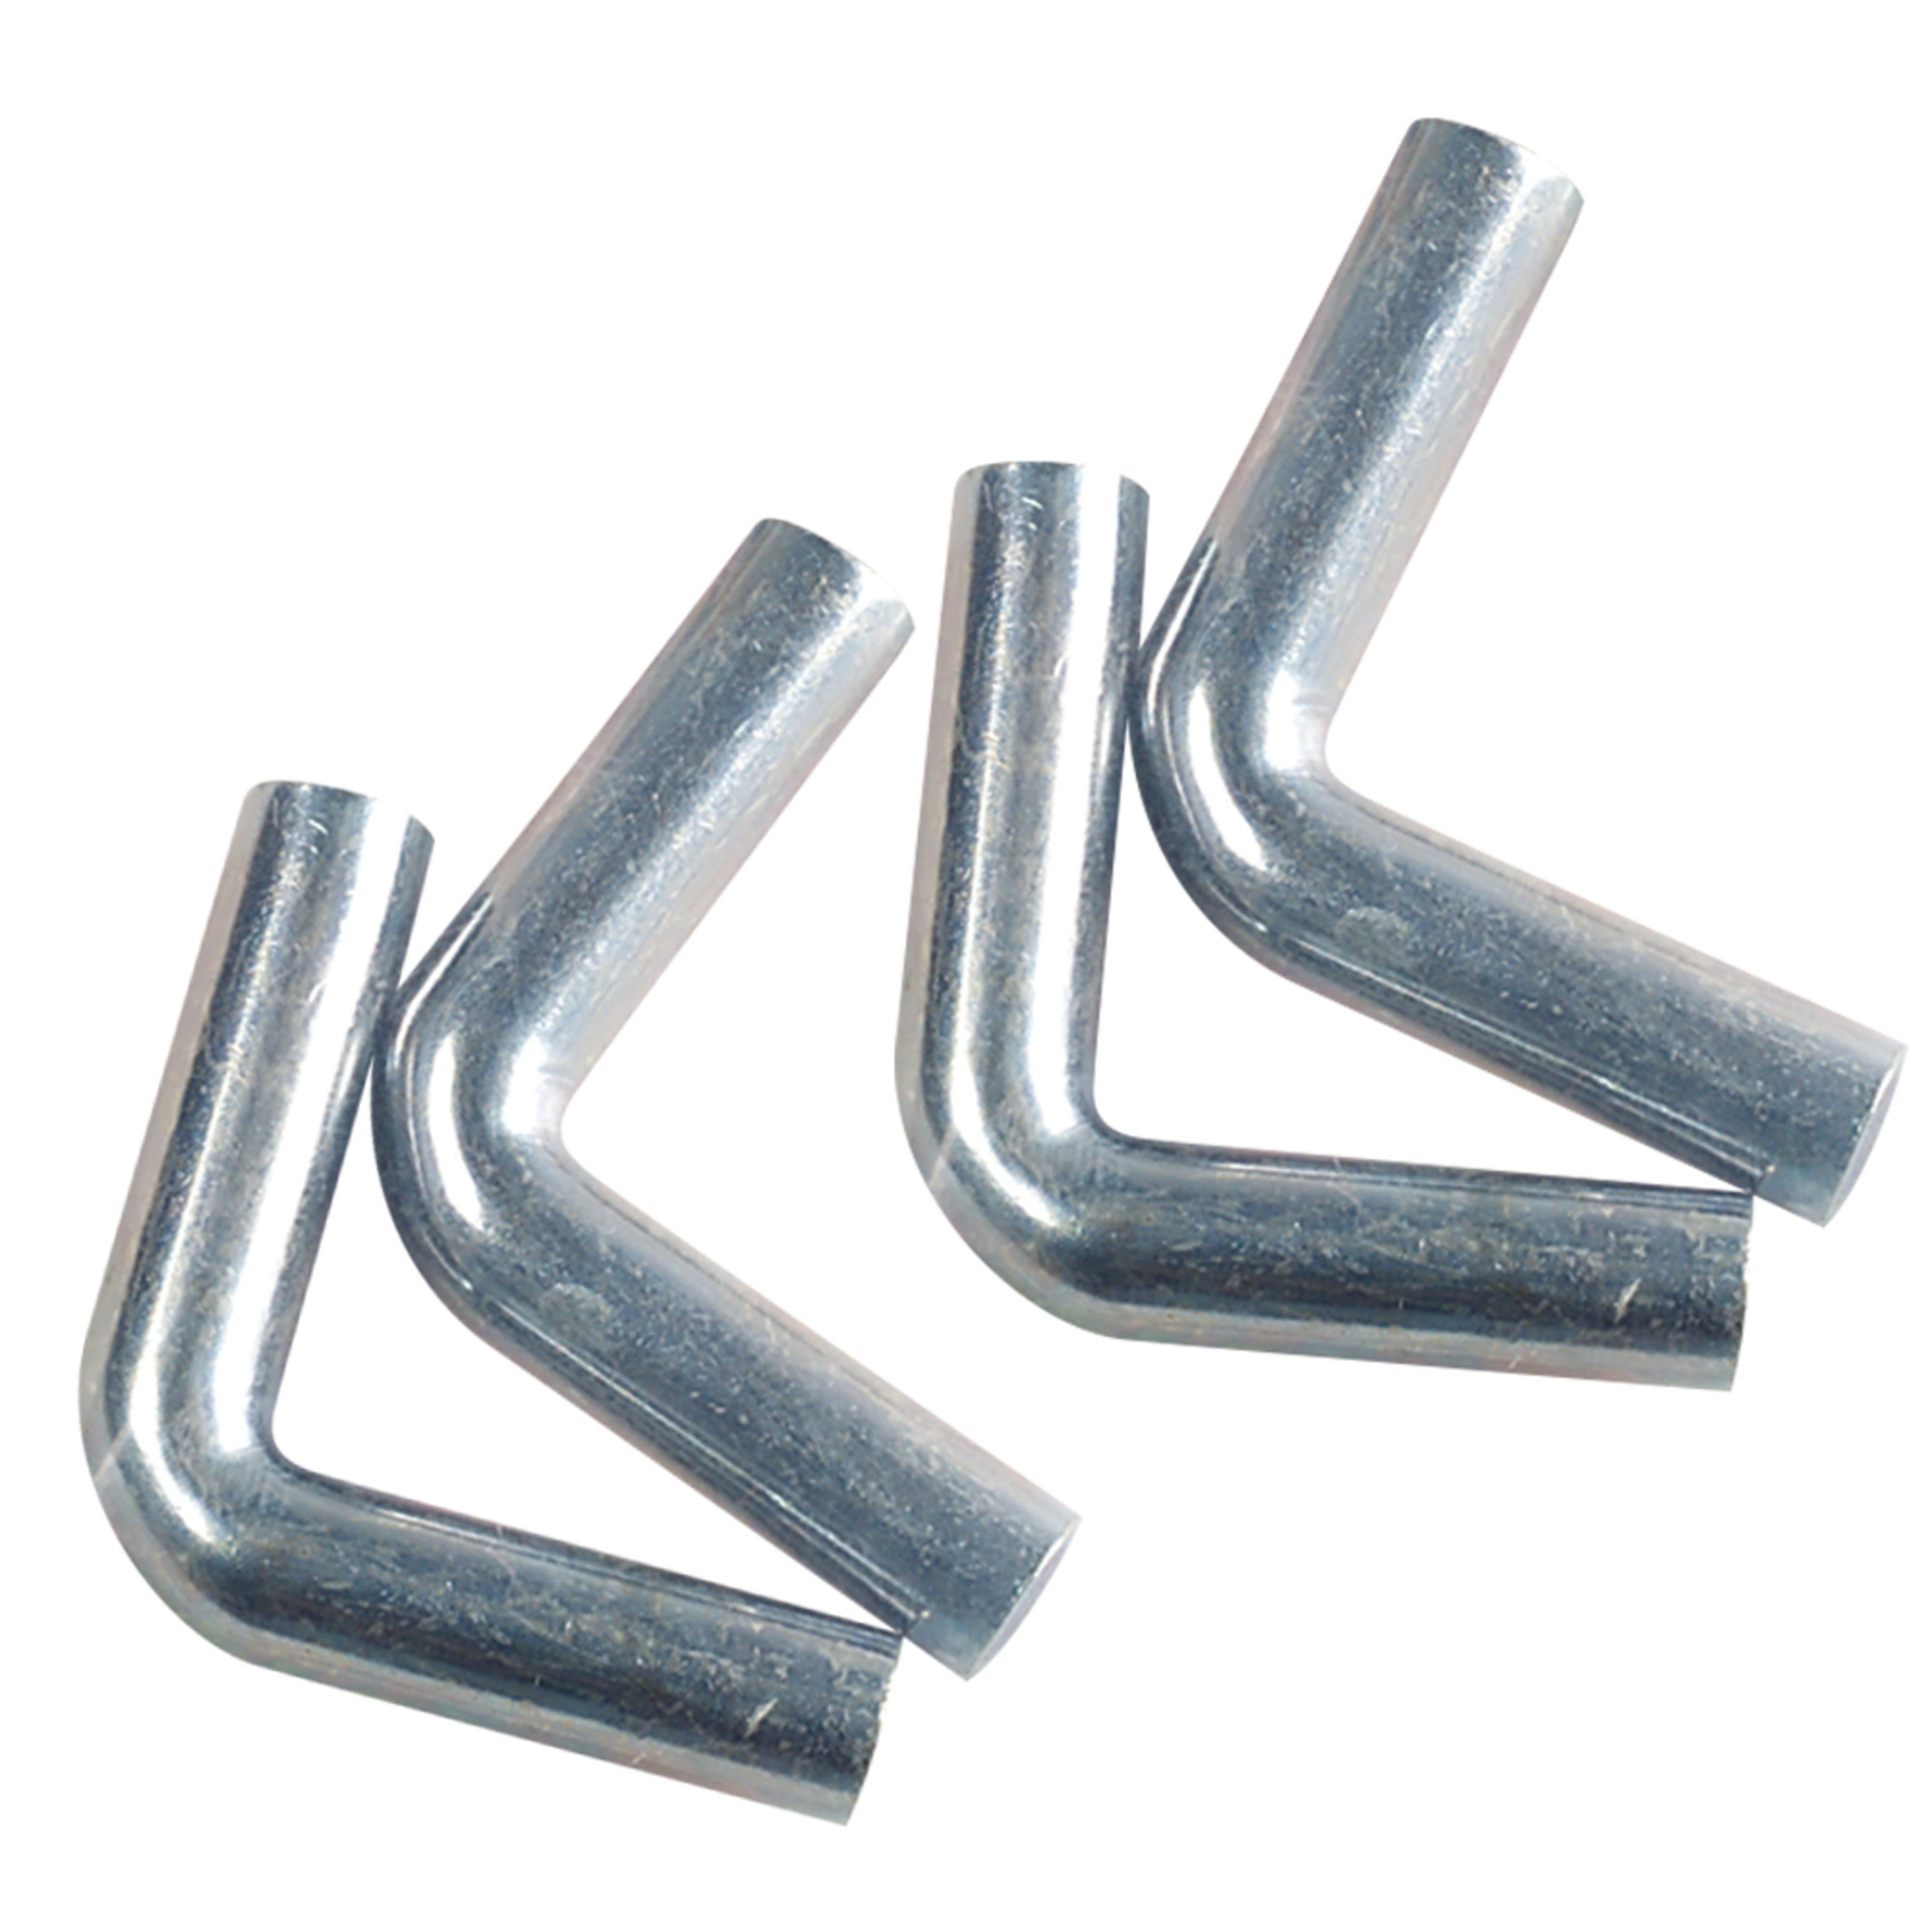 Tommy Docks, Zinc Quick Release L-Pin 4-Pack, Product Type Hardware, Length 5 in, Width 6 in, Model A-50004-4